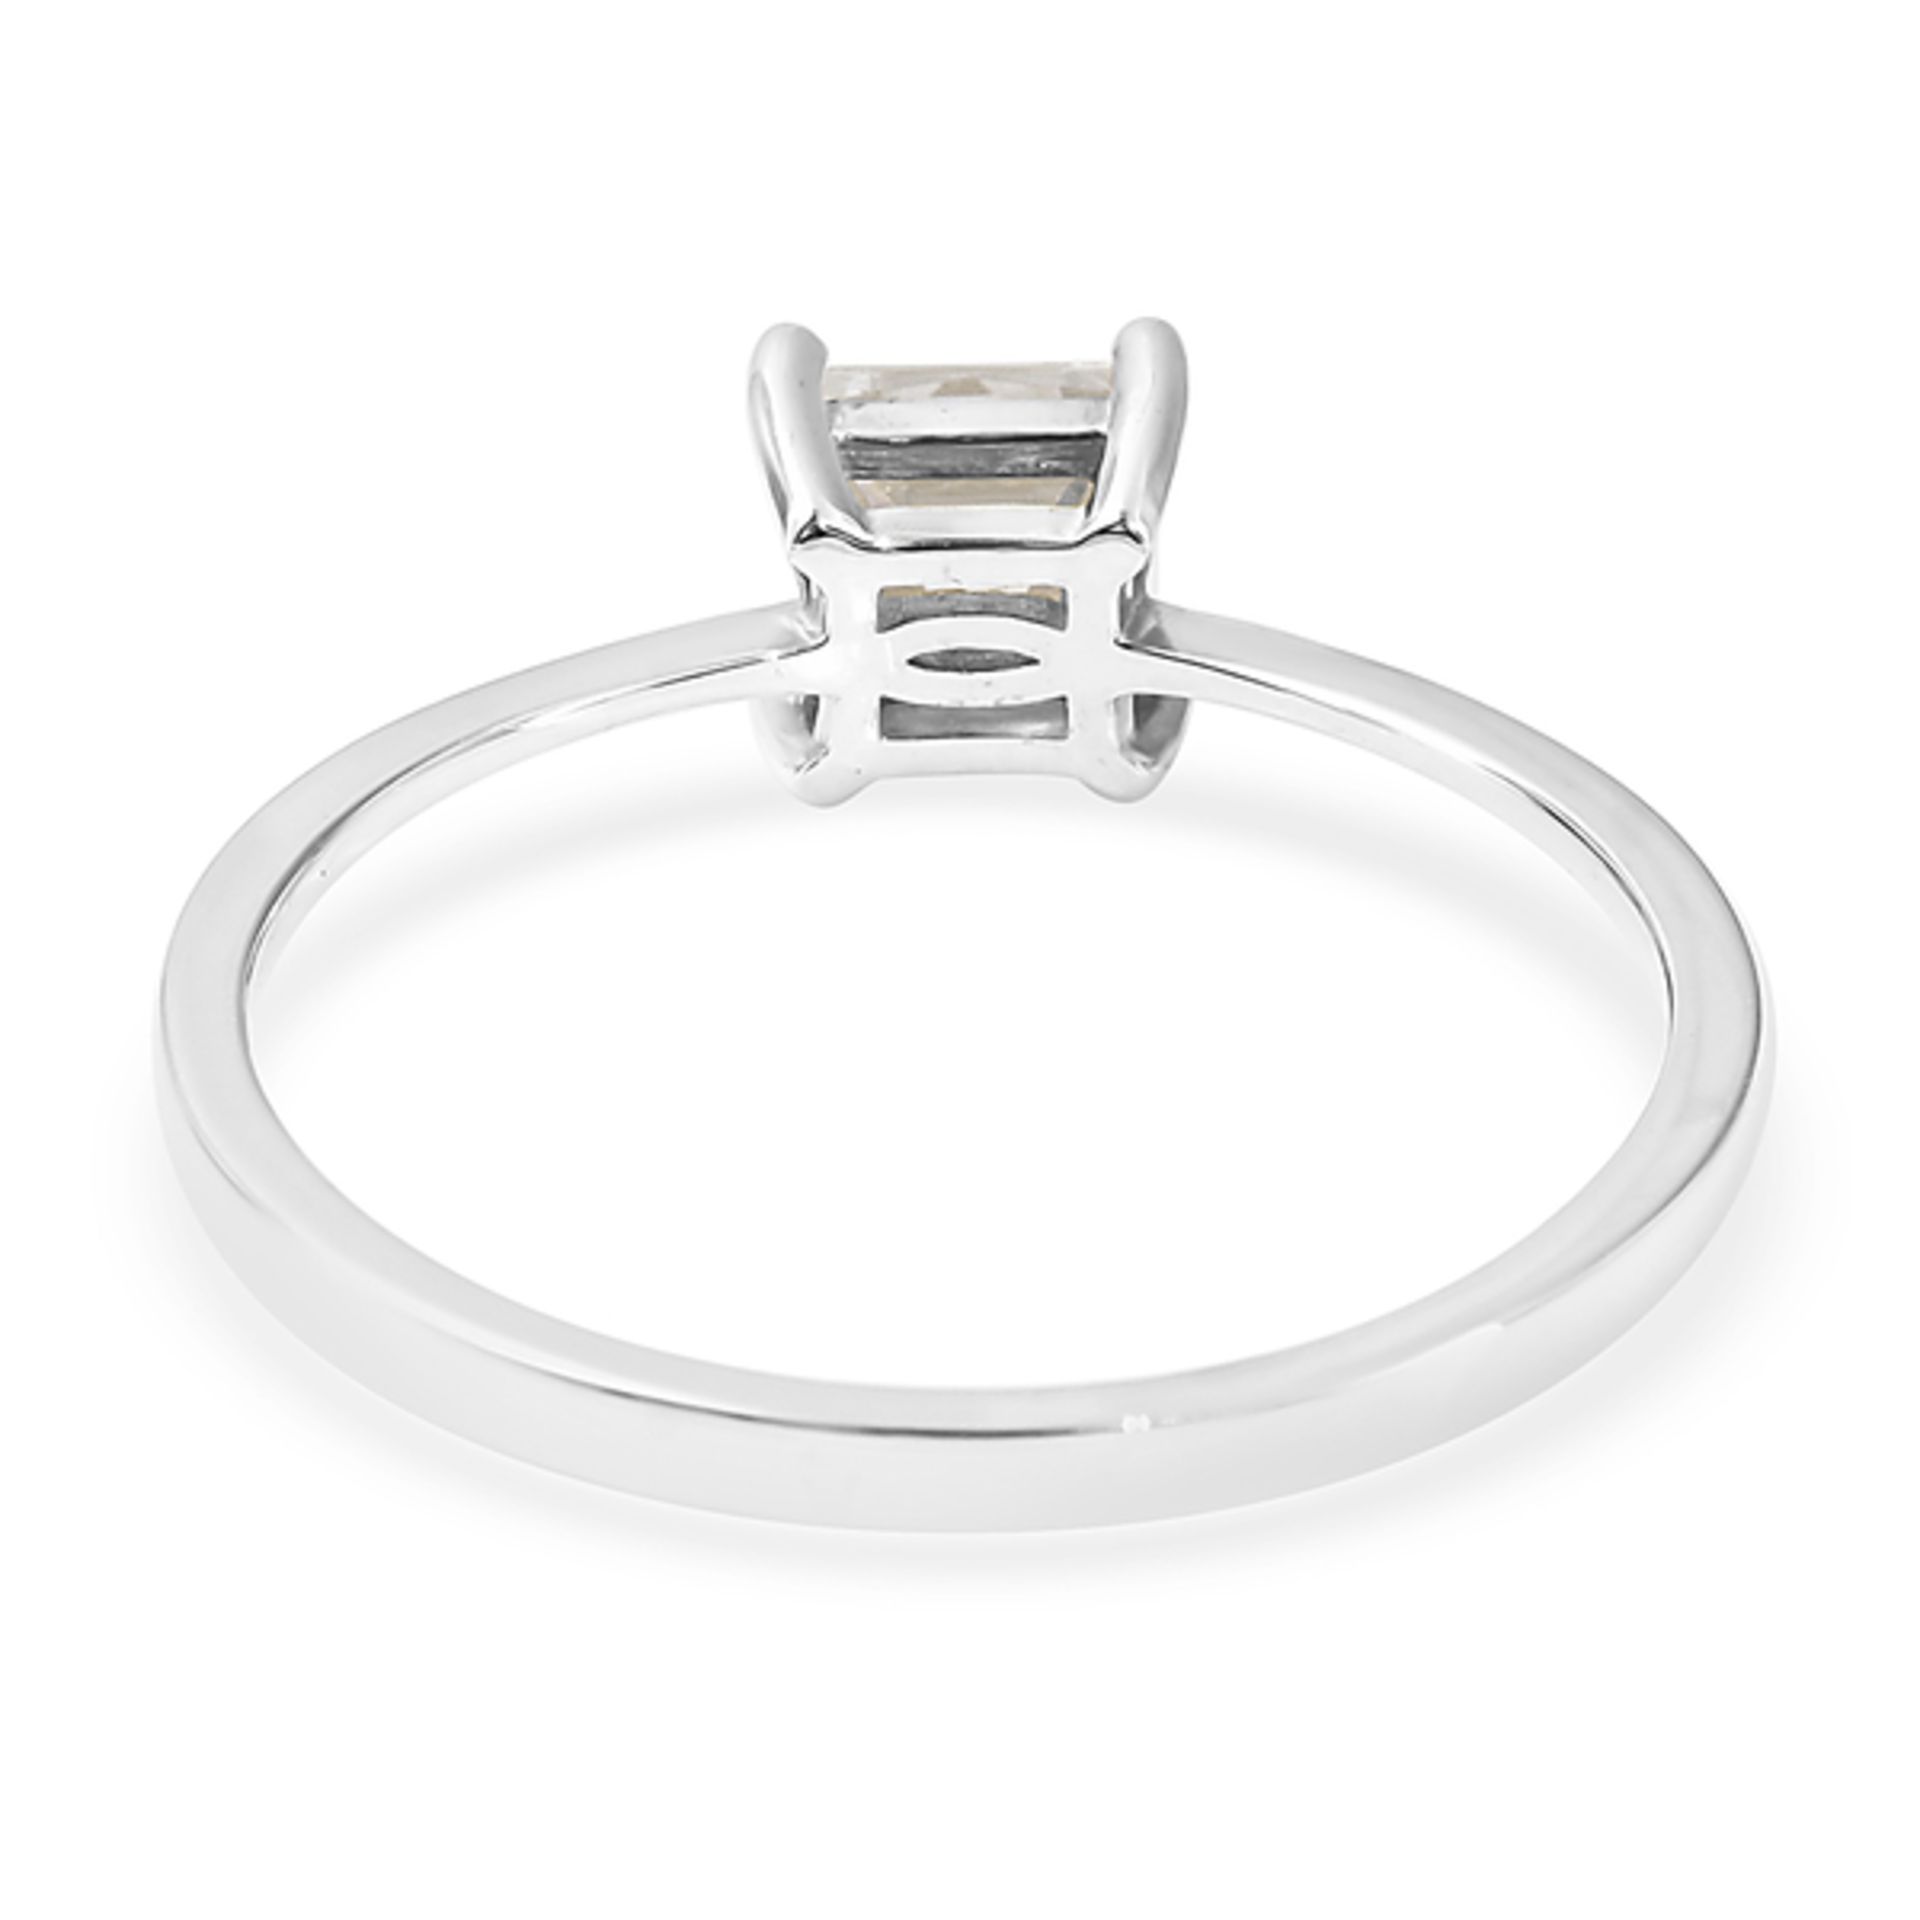 NEW!! J Francis Sterling Silver Solitaire Ring Made with SWAROVSKI ZIRCONIA - Image 3 of 3